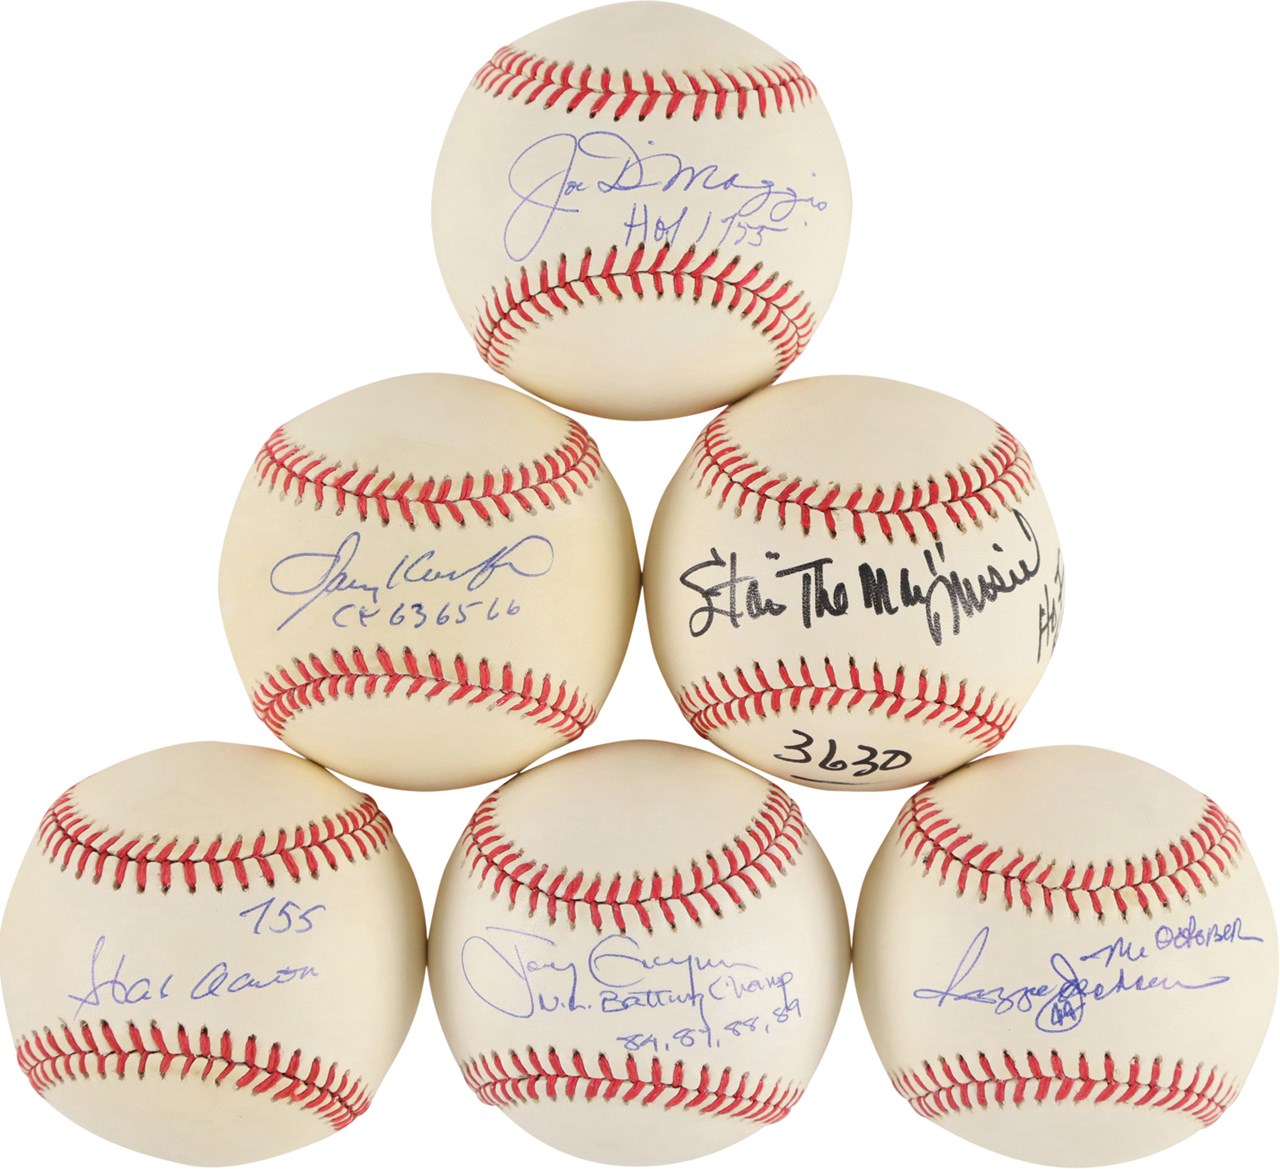 - Hall of Fame "Special Inscription" Single Signed Baseball Collection (15) w/Aaron, DiMaggio, and Koufax